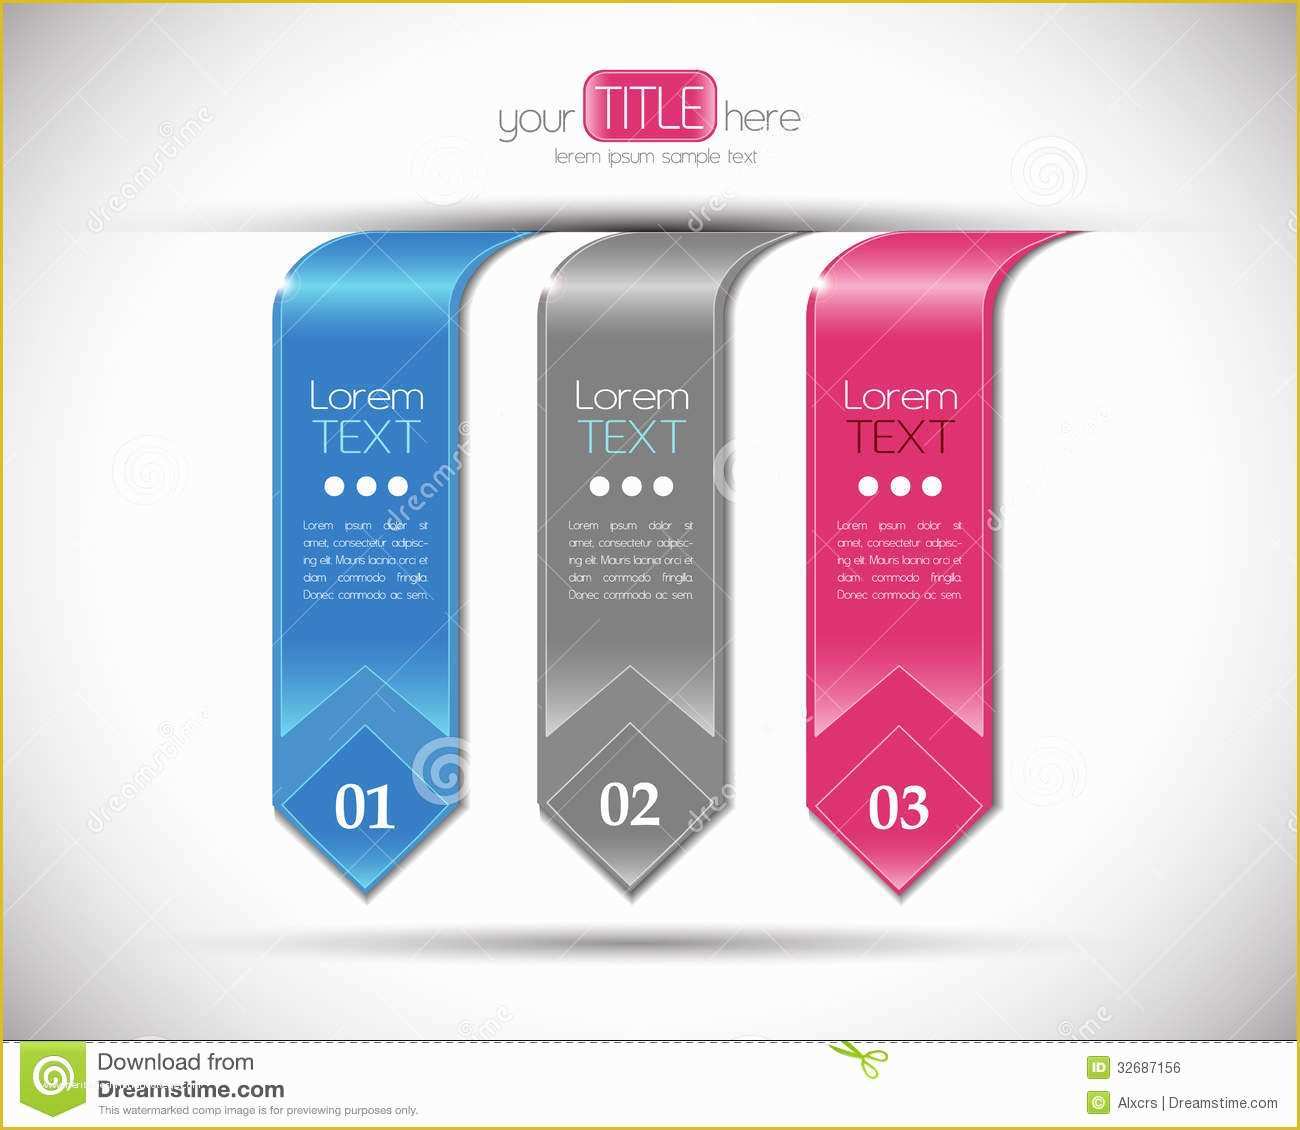 Free Graphic Templates Of Modern Number Banners Design Template Royalty Free Stock